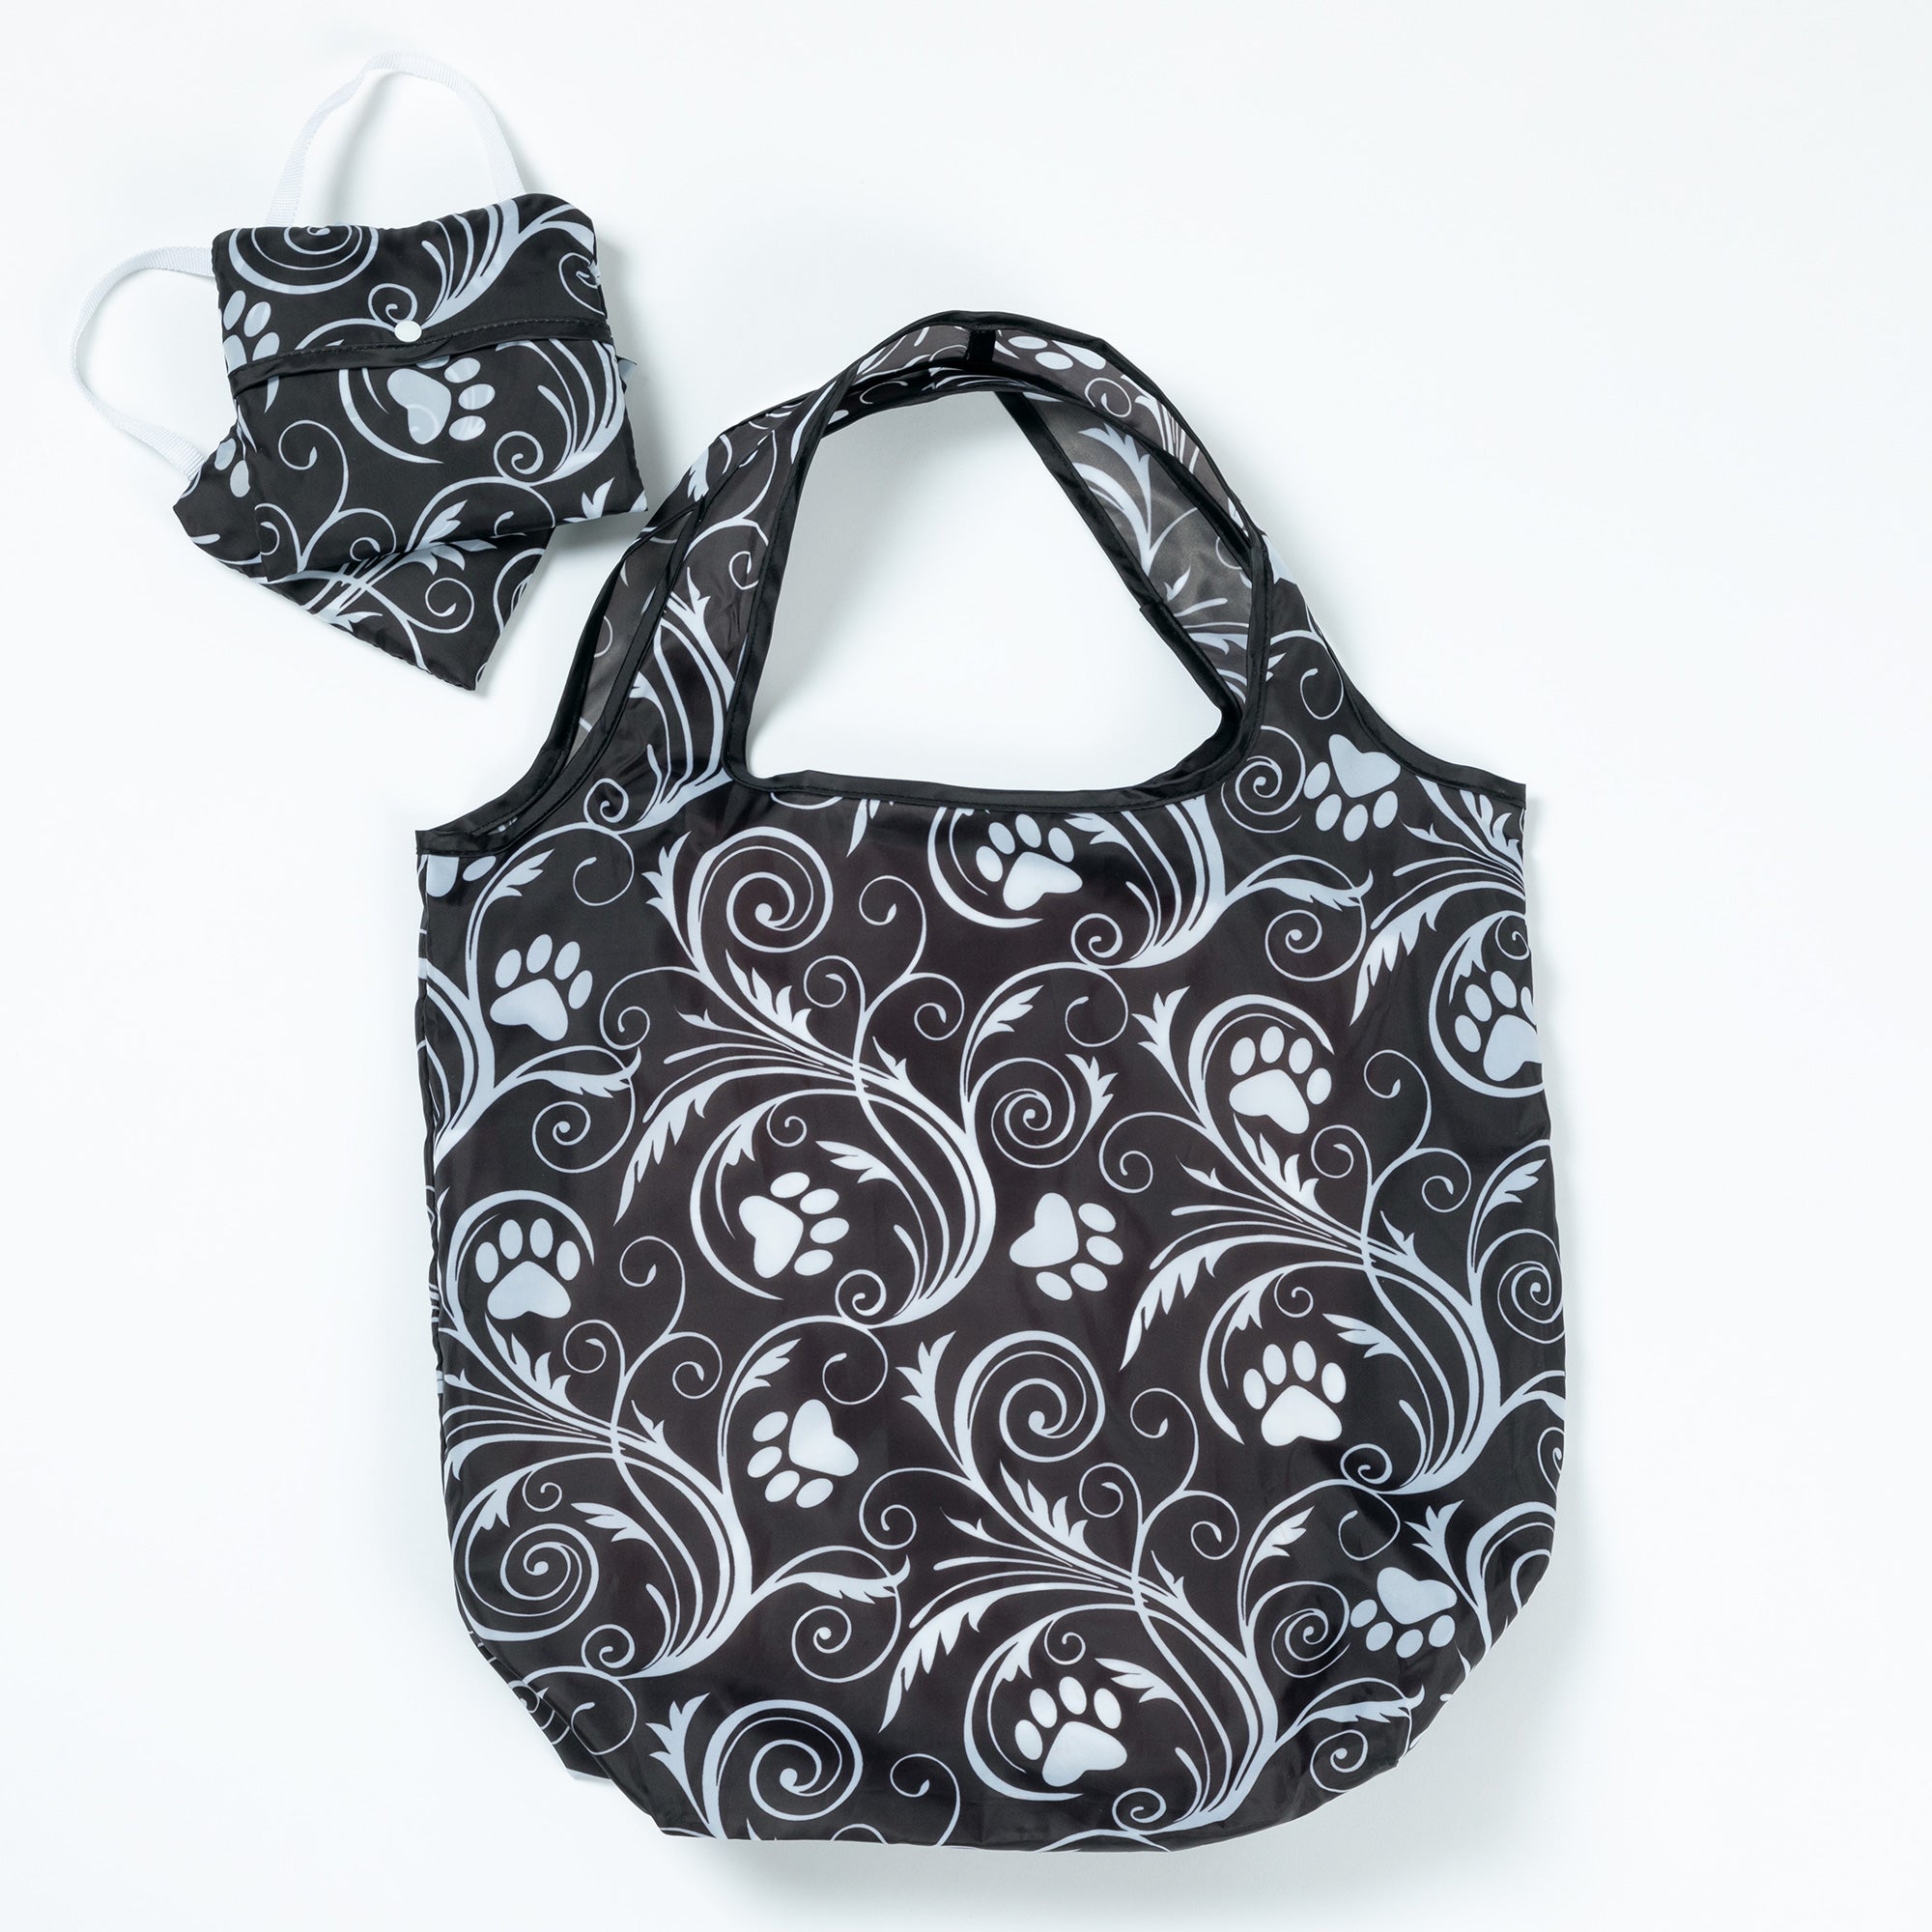 Perfectly Patterned Shopping Totes - Set Of 3 - Flourish Paws